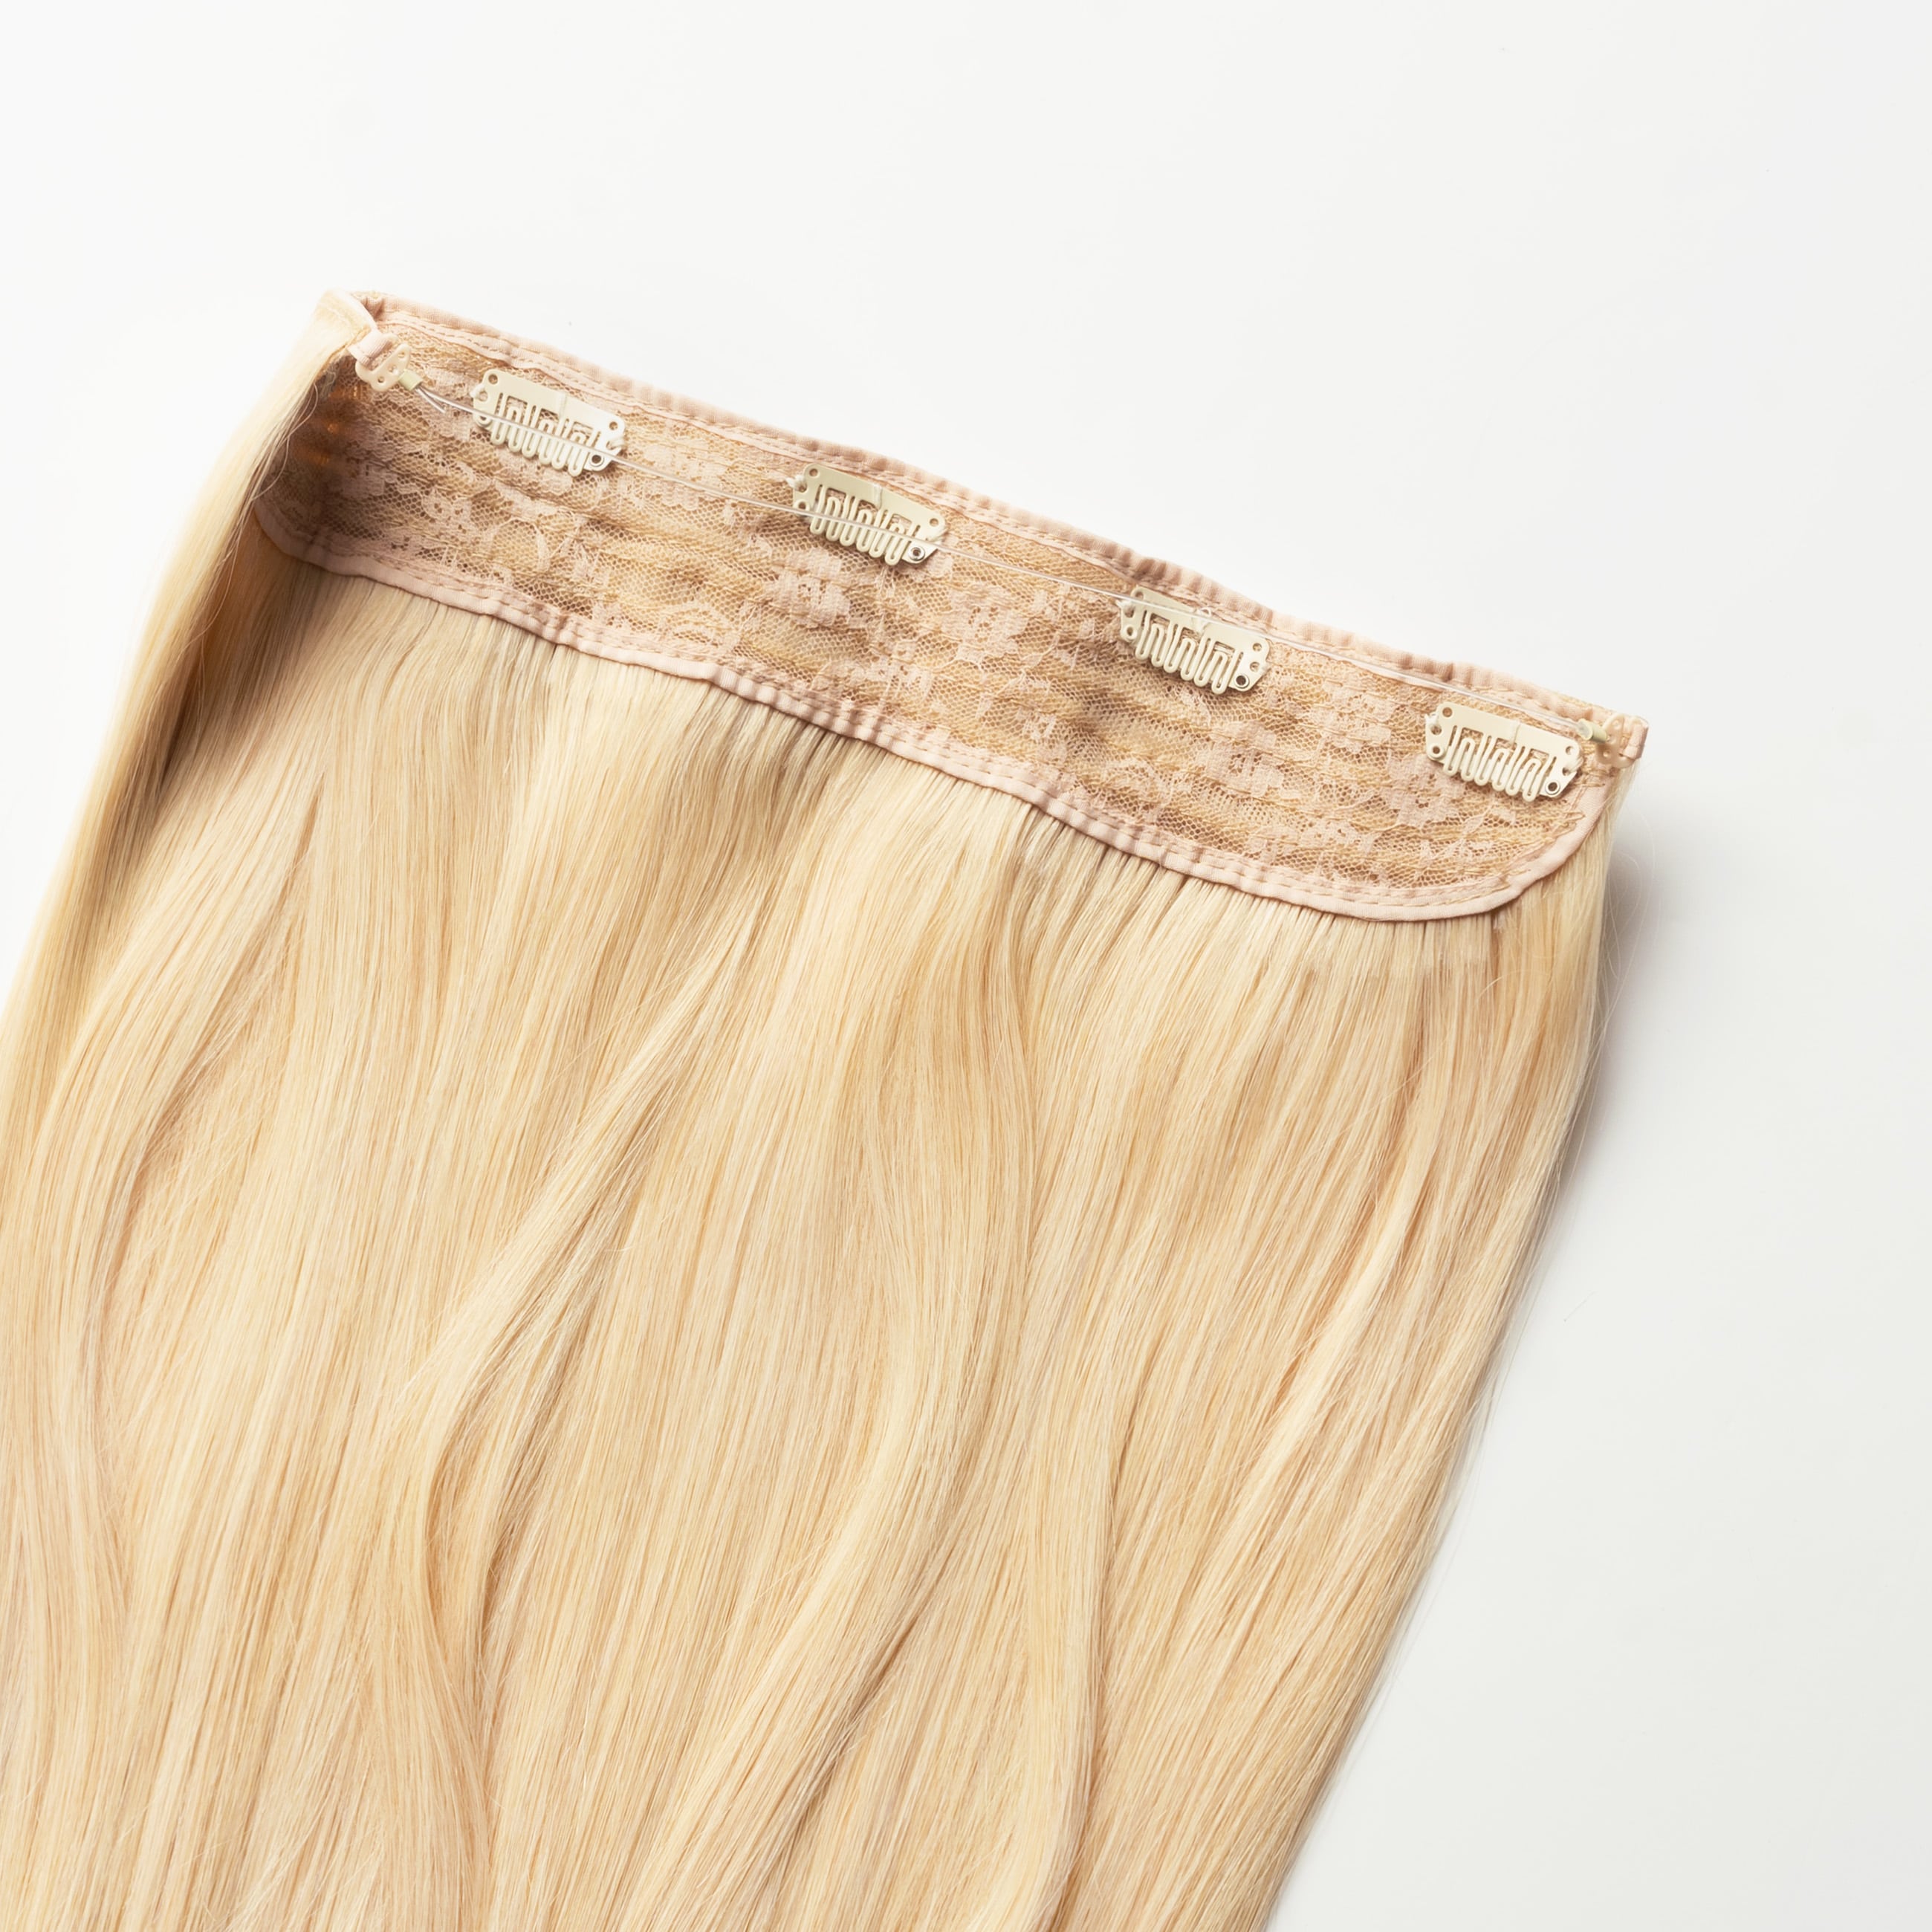 Halo extensions - Gyllenblond nr. 22